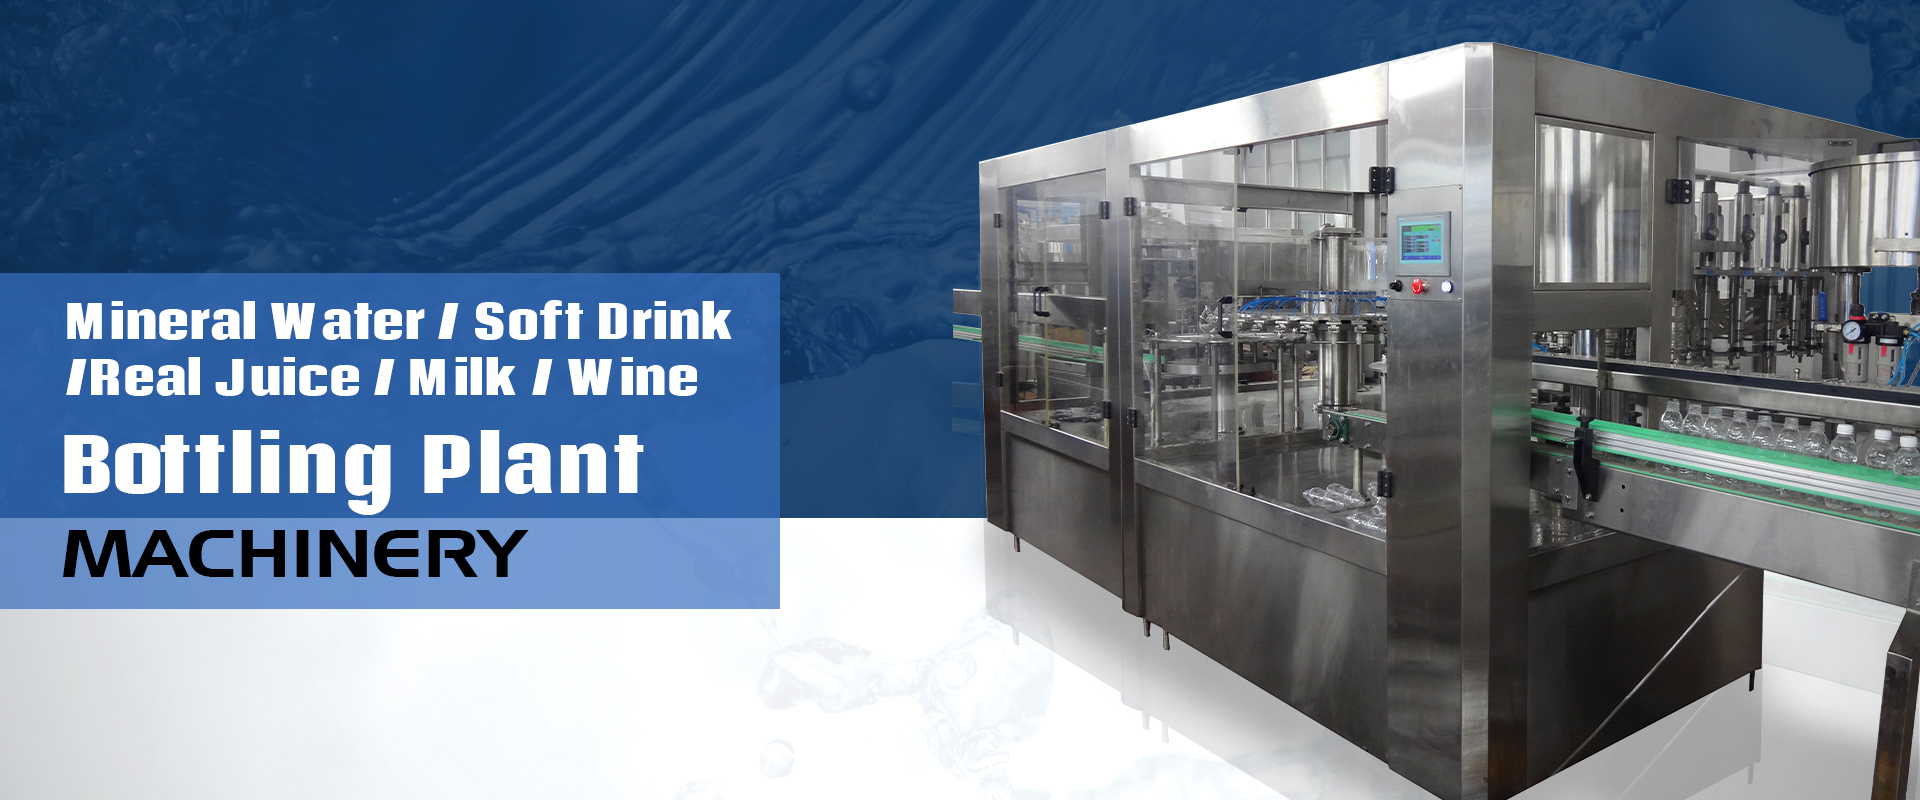 Mineral Water / Soft Drink / Real Juice / Milk / Wine Bottling Plant And Machinery In Limeira